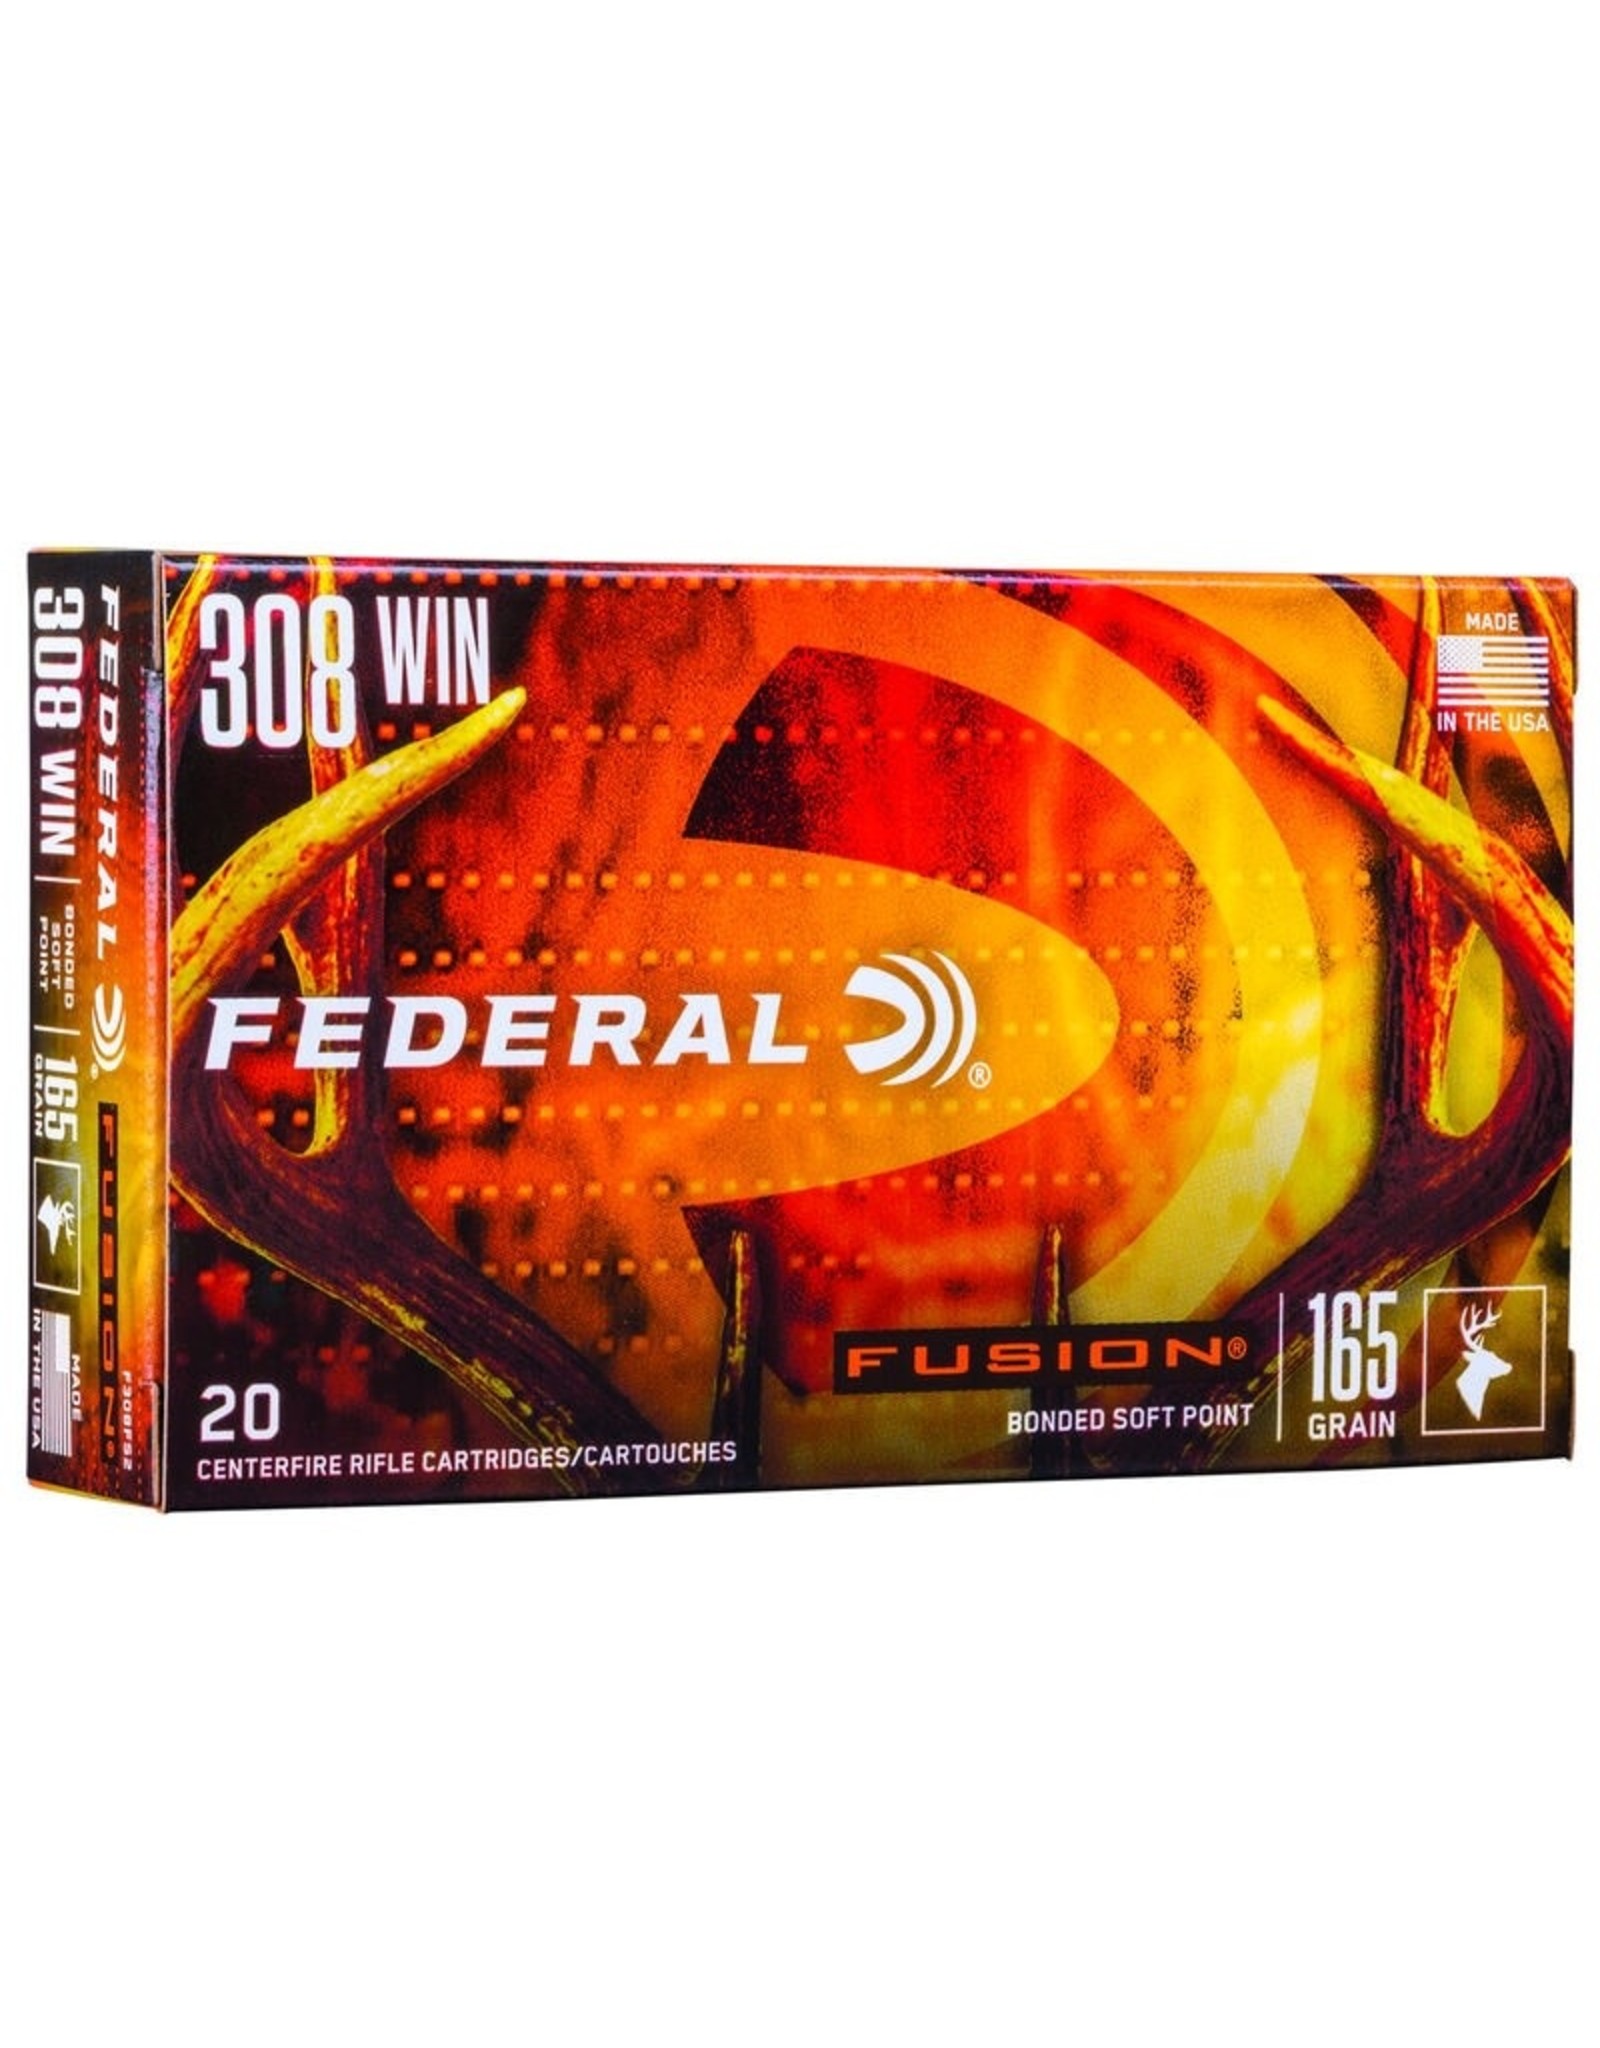 Federal Fusion F308FS2 Rifle Ammo 308 WIN, 165 Grains, 2700 fps, 20, Boxed